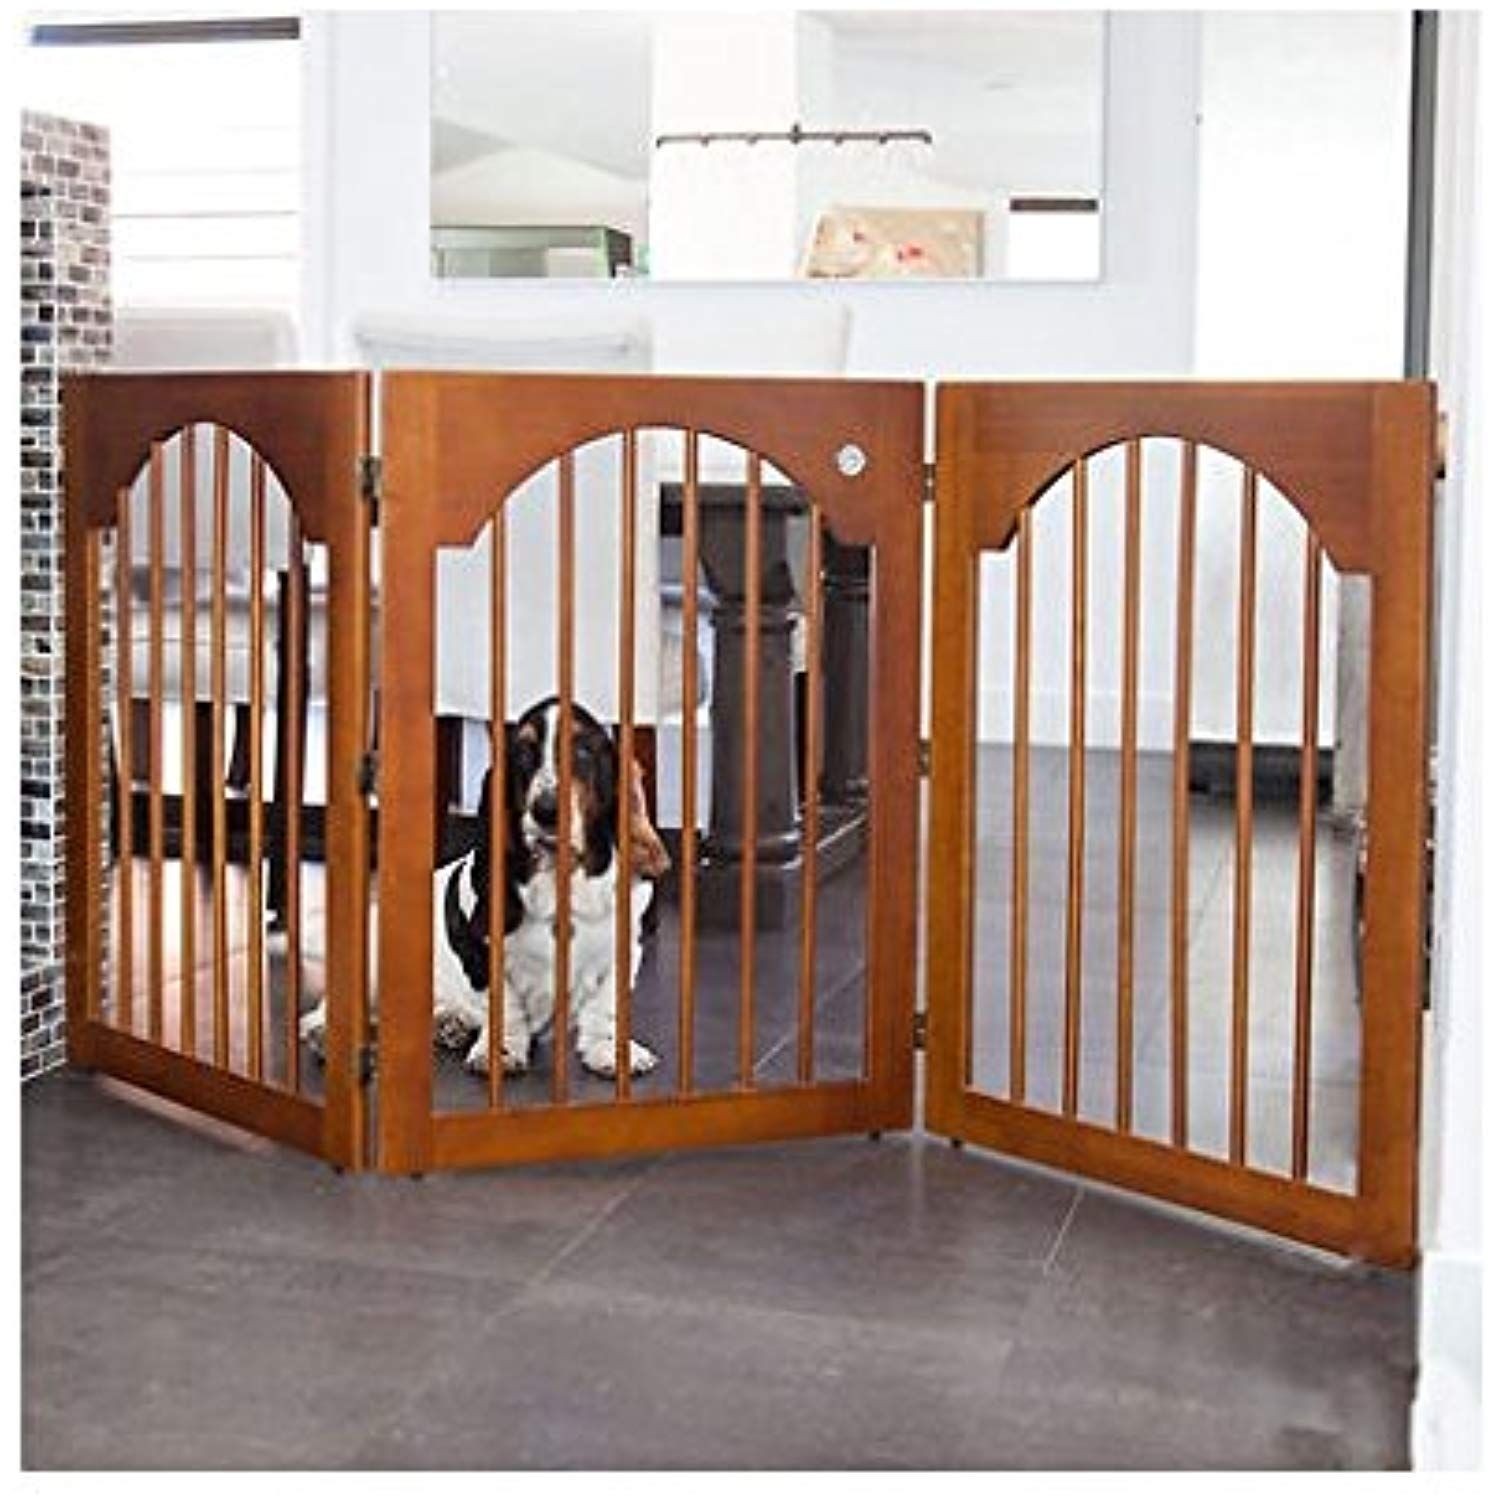 47 1/4 W x 19 Tall Etna 3-Panel Wood Pet Gate with Bone Cutout Design Stairs Freestanding Tri Fold Dog Fence for Doorways Indoor/Outdoor Pet Barrier 